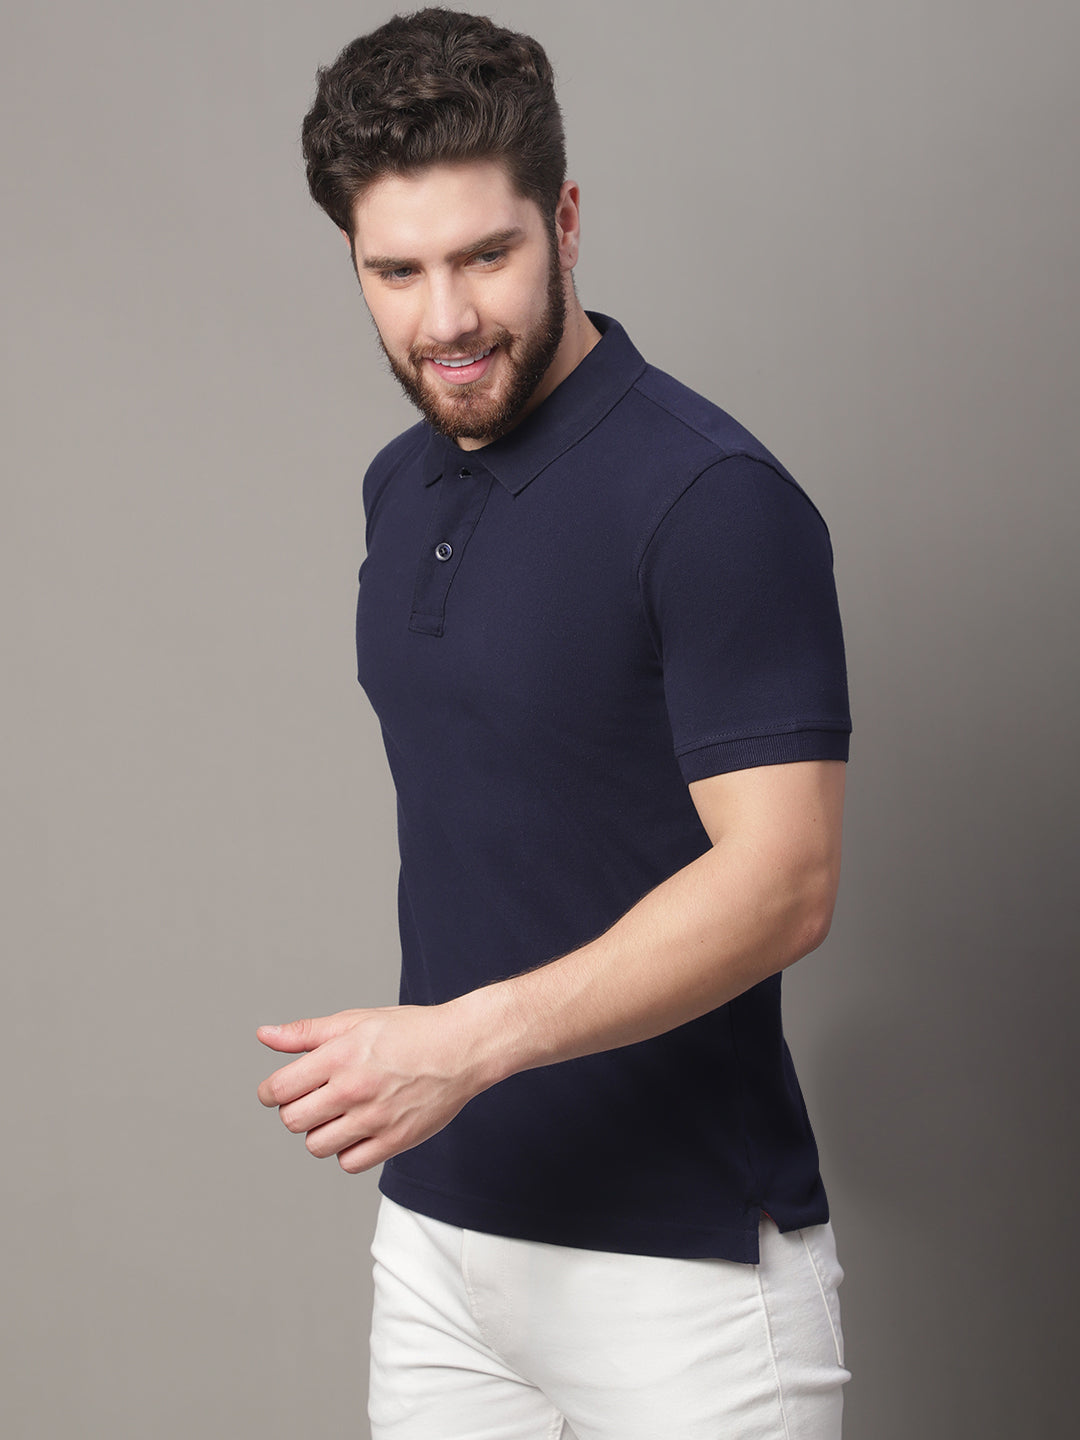 Men's Half Sleeves Solid Polo T-shirt - Friskers